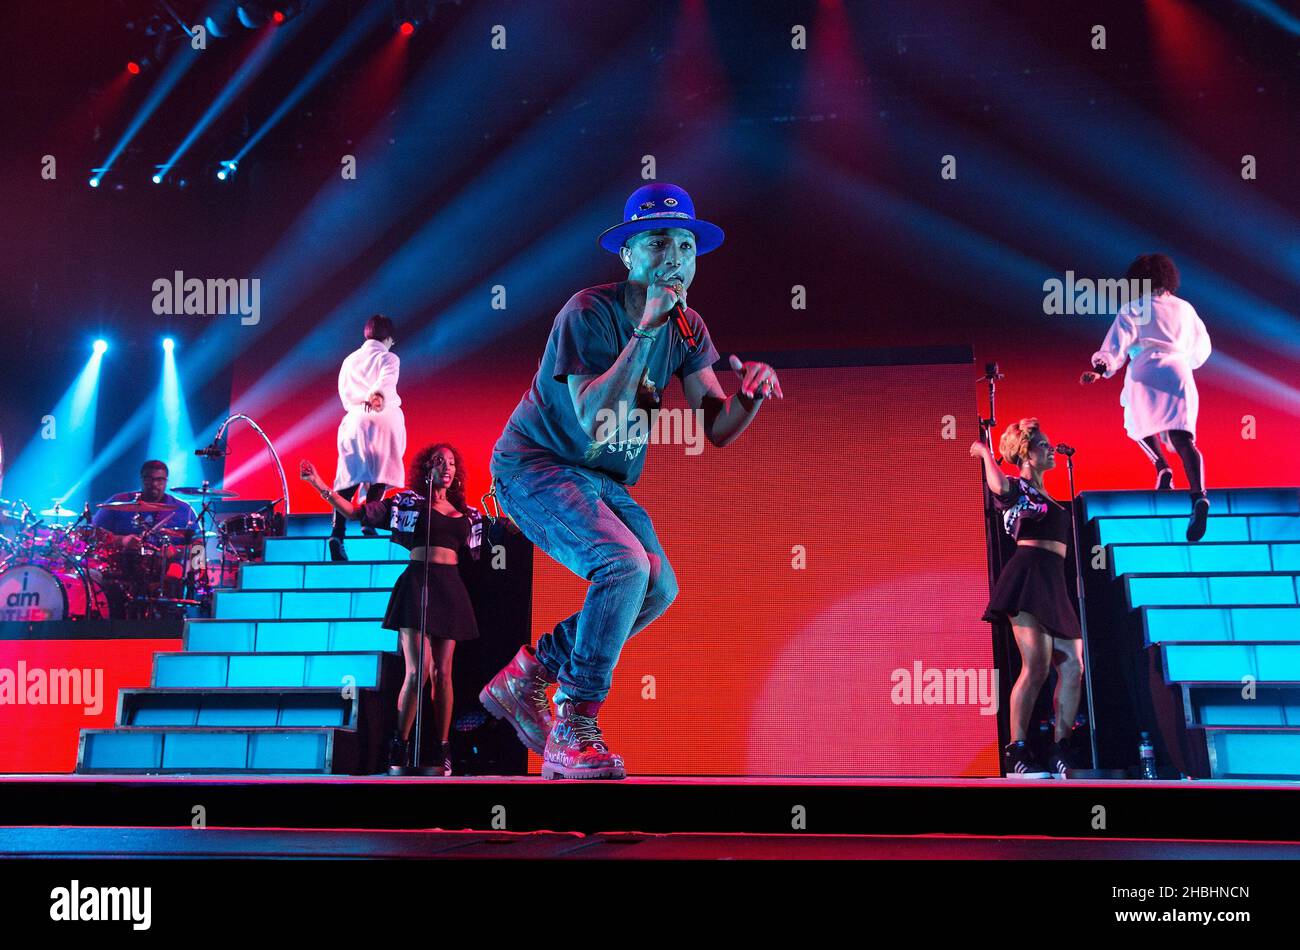 Pharrell Williams performs on stage at the 02 Arena in London. Stock Photo